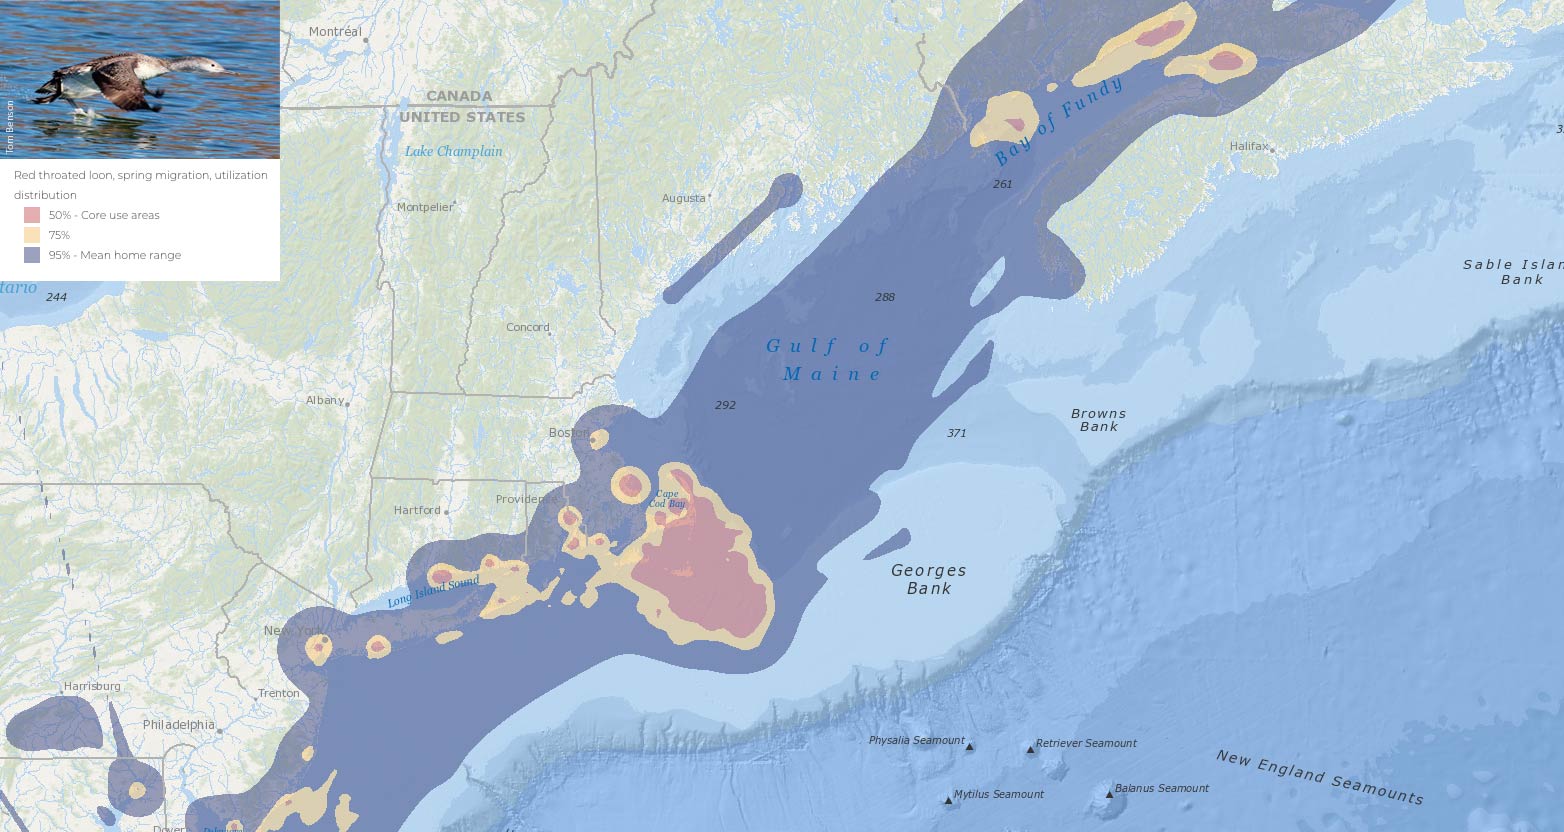 Red-throated loon map